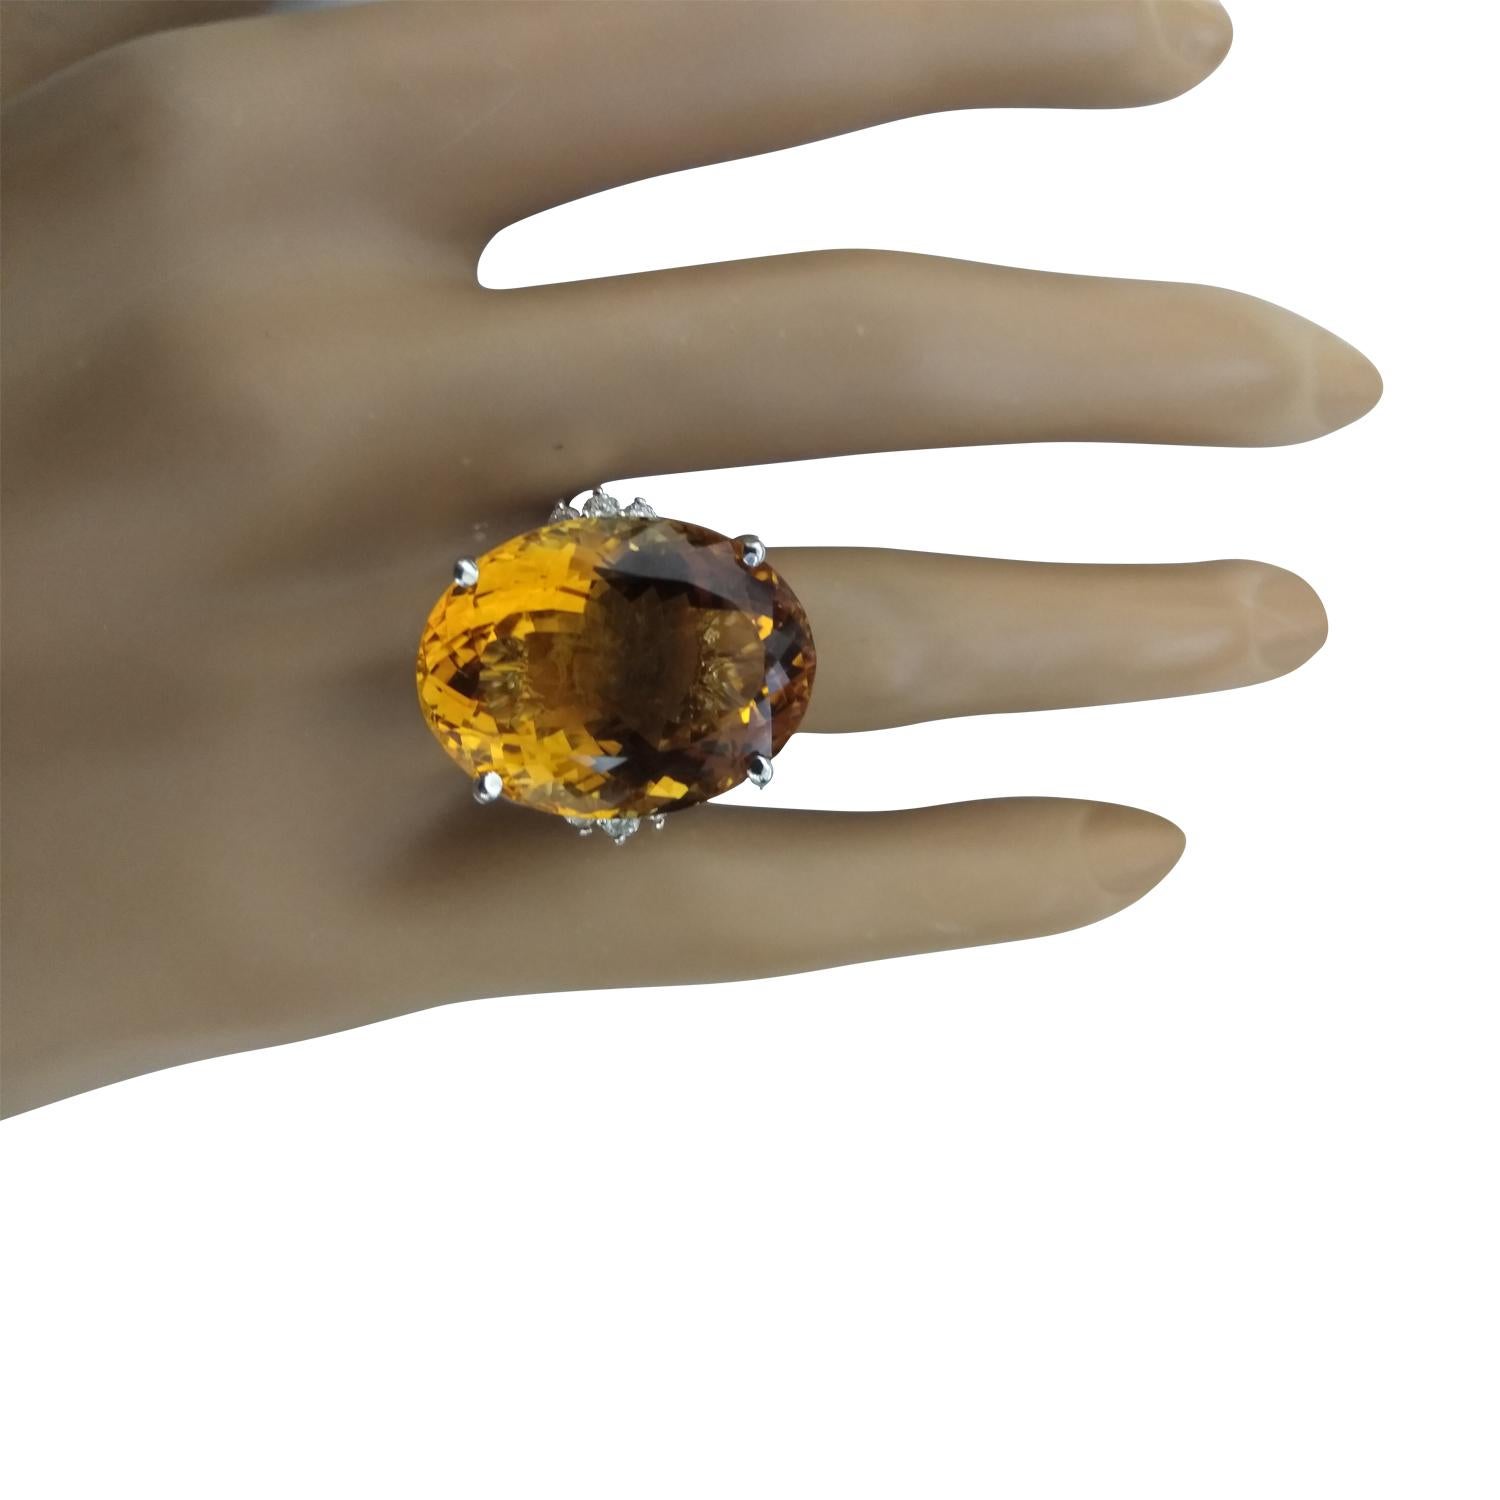 23.65 Carat Natural Citrine 14 Karat Solid White Gold Diamond Ring
Stamped: 14K 
Total Ring Weight: 11.3 Grams 
Citrine Weight 23.40 Carat (20.00x15.00 Millimeters)
Diamond Weight: 0.25 carat (F-G Color, VS2-SI1 Clarity )
Face Measures: 20.00x20.85